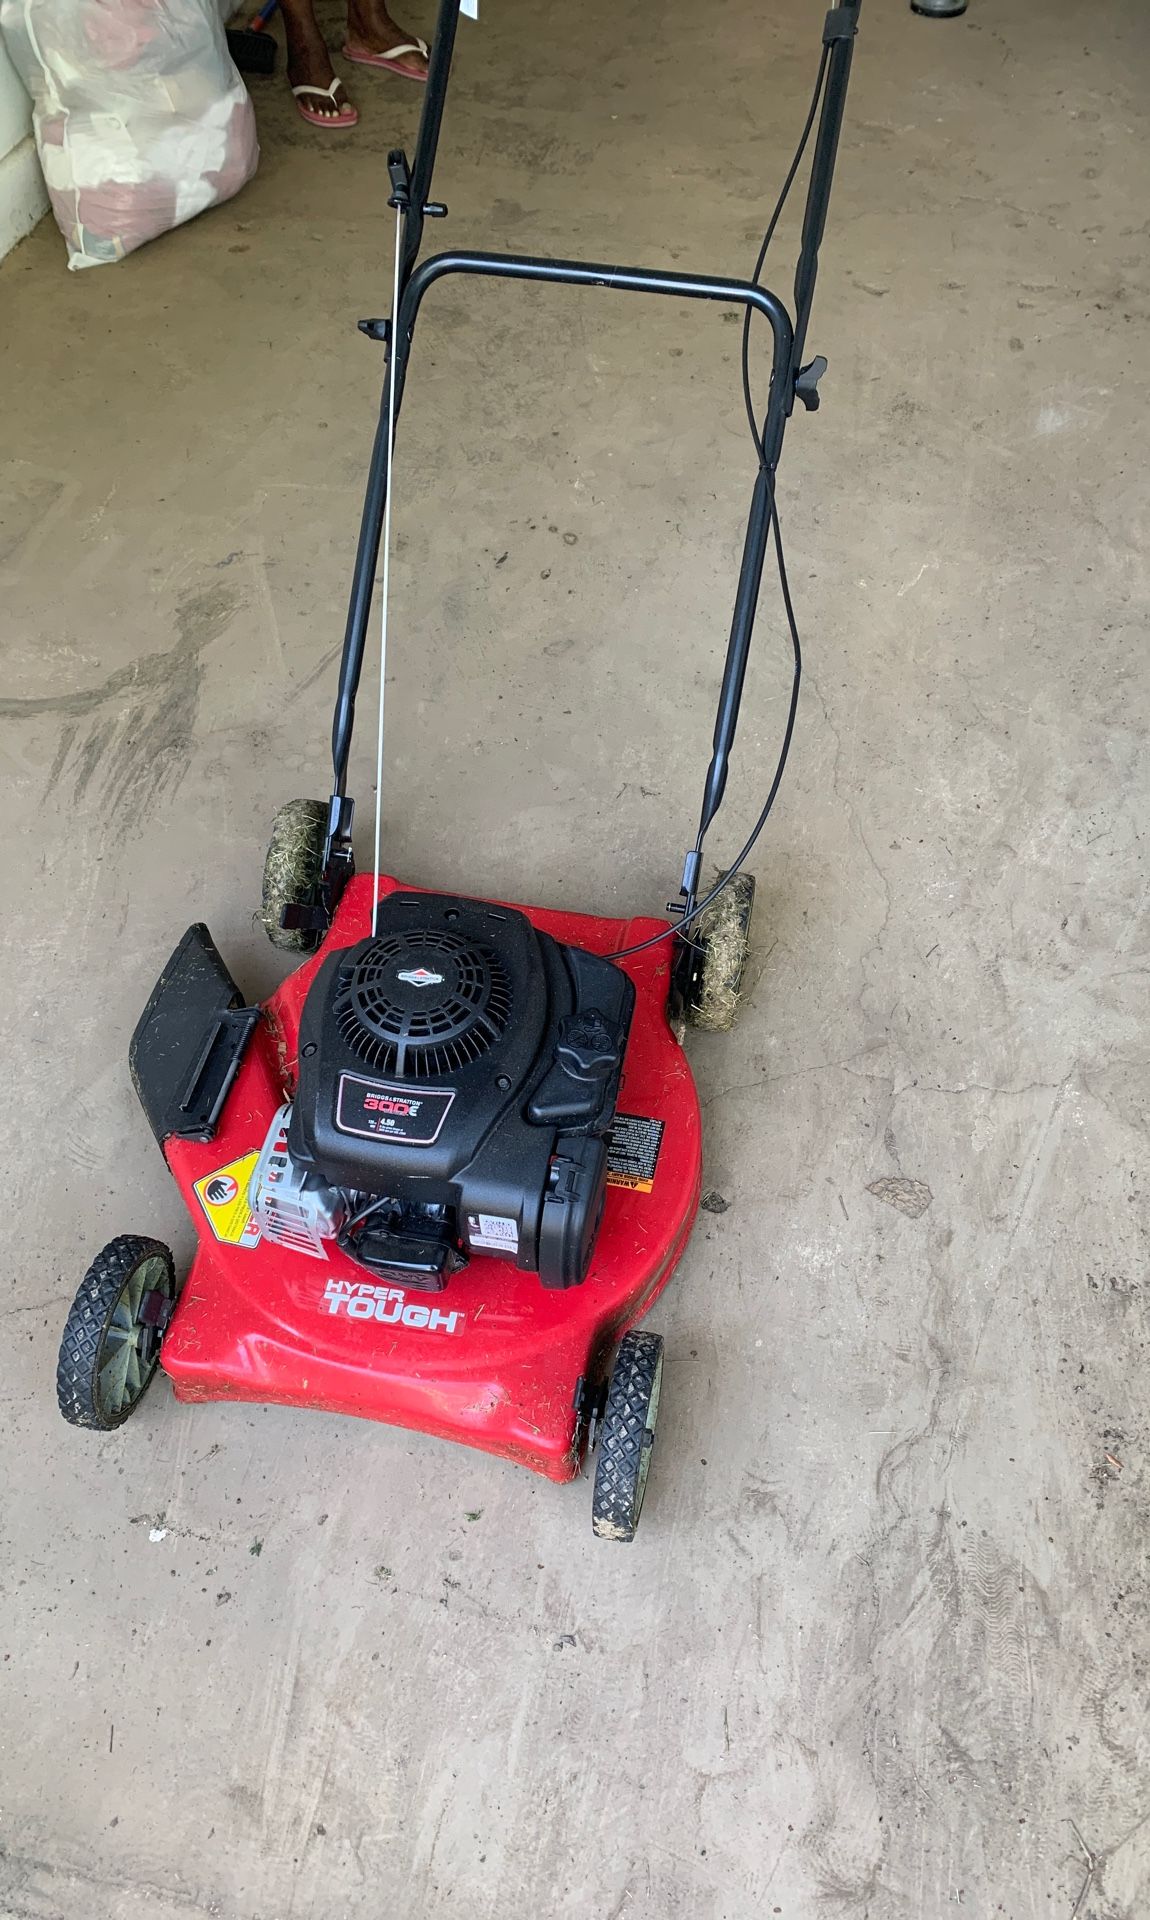 Kobalt blower and weed wacker with battery charger hyper tough lawn mower by Briggs and Stratton